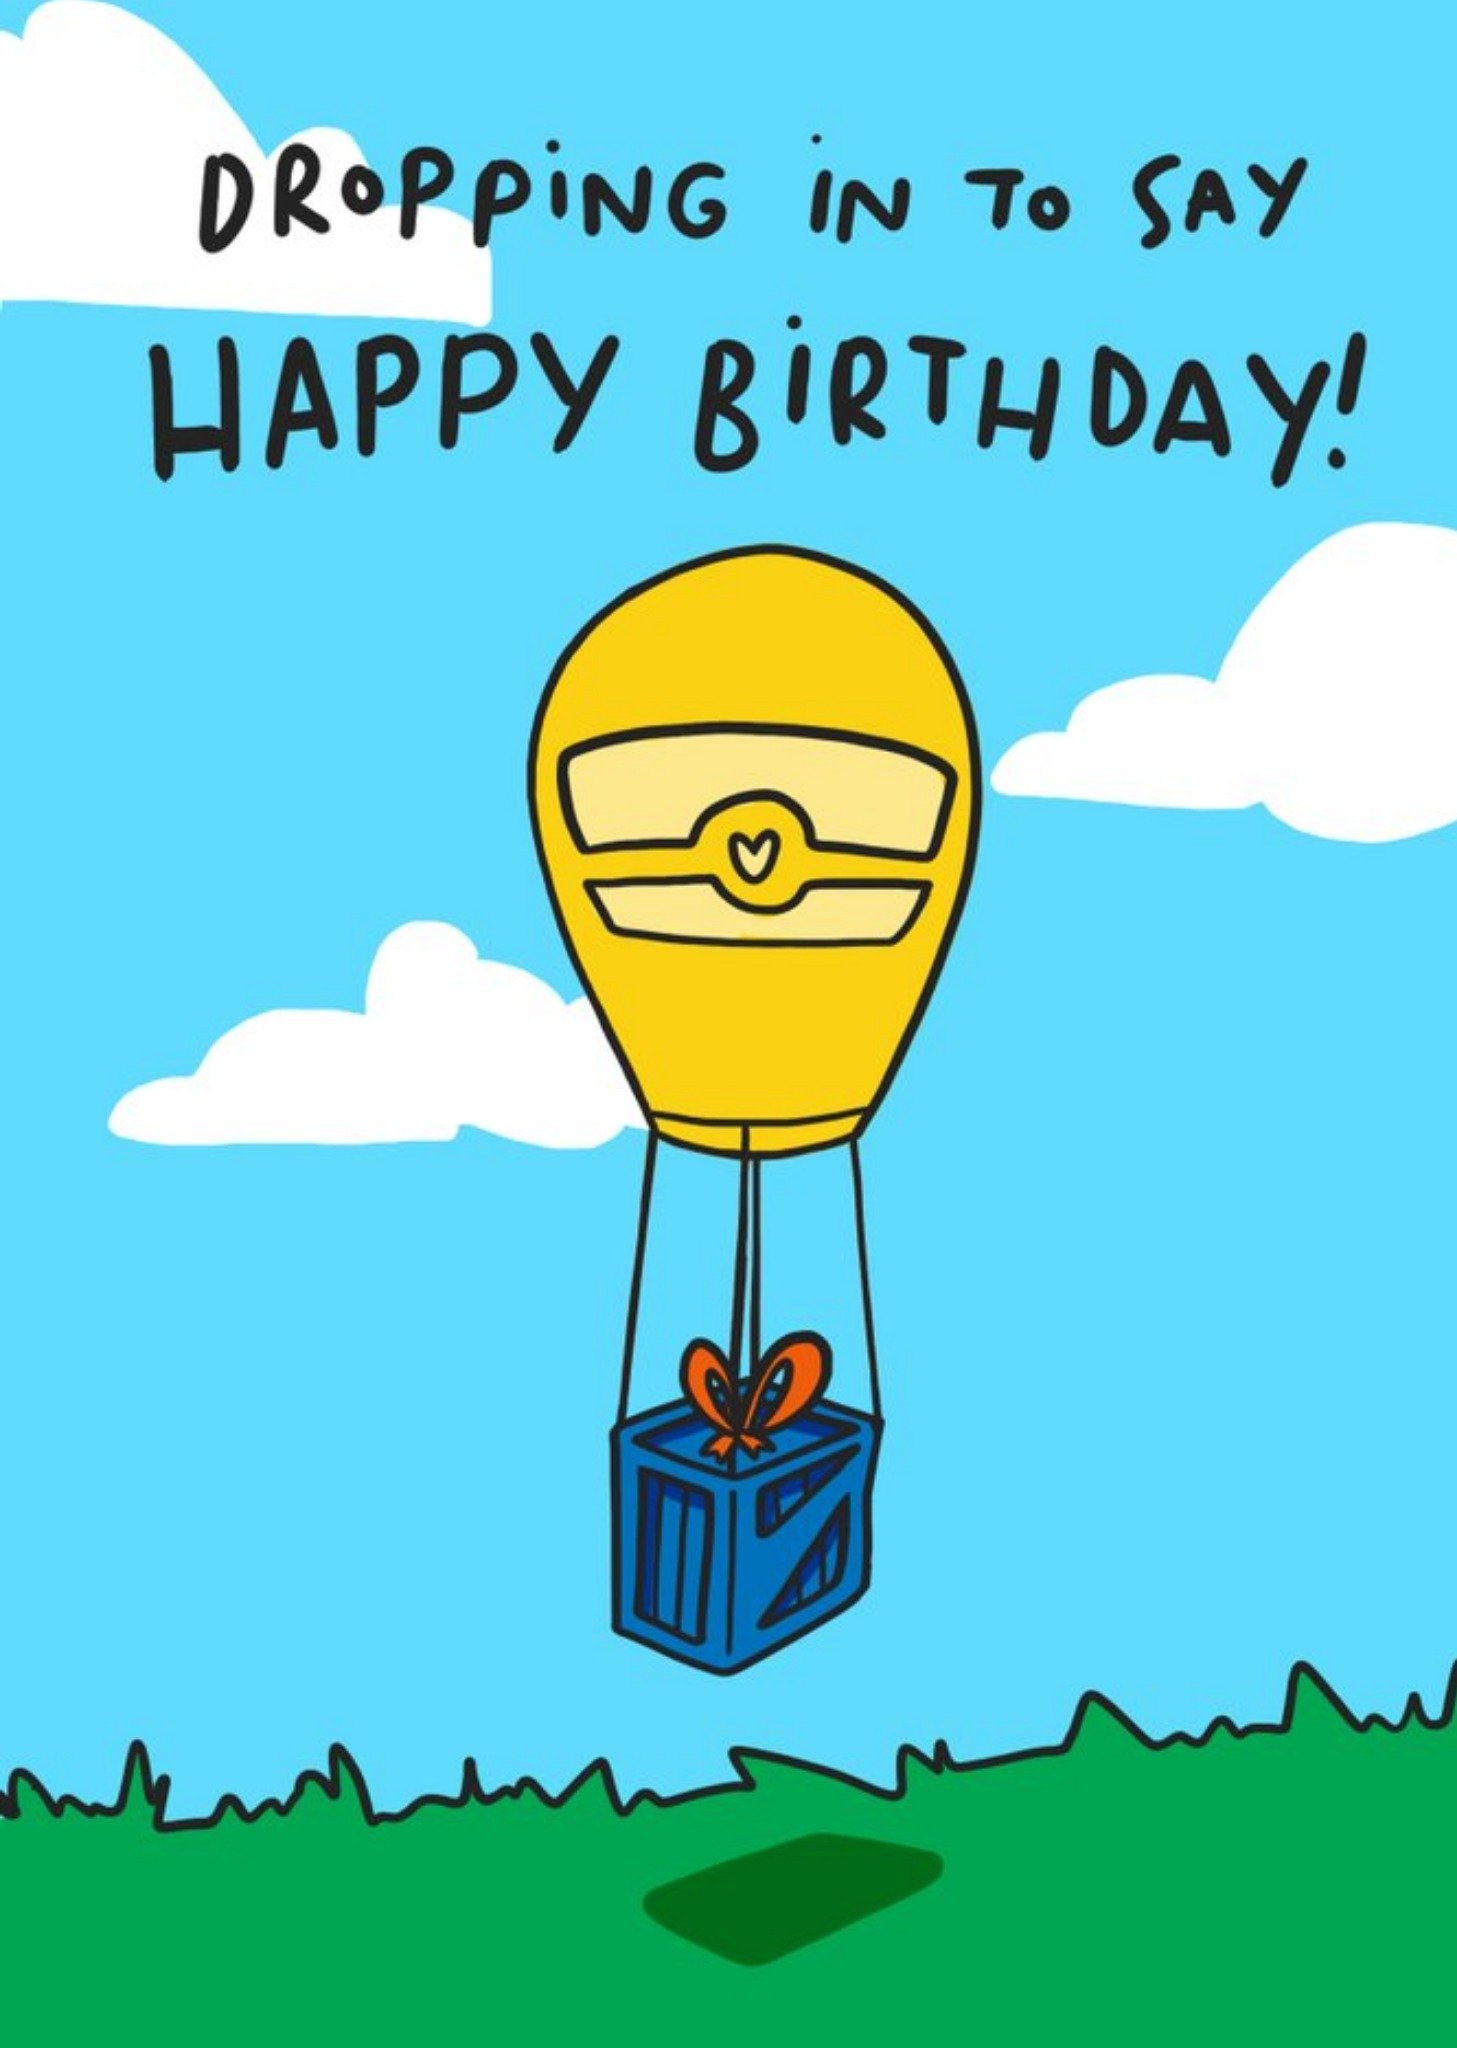 Moonpig Gaming Loot Drop Dropping In To Say Happy Birthday Card, Large